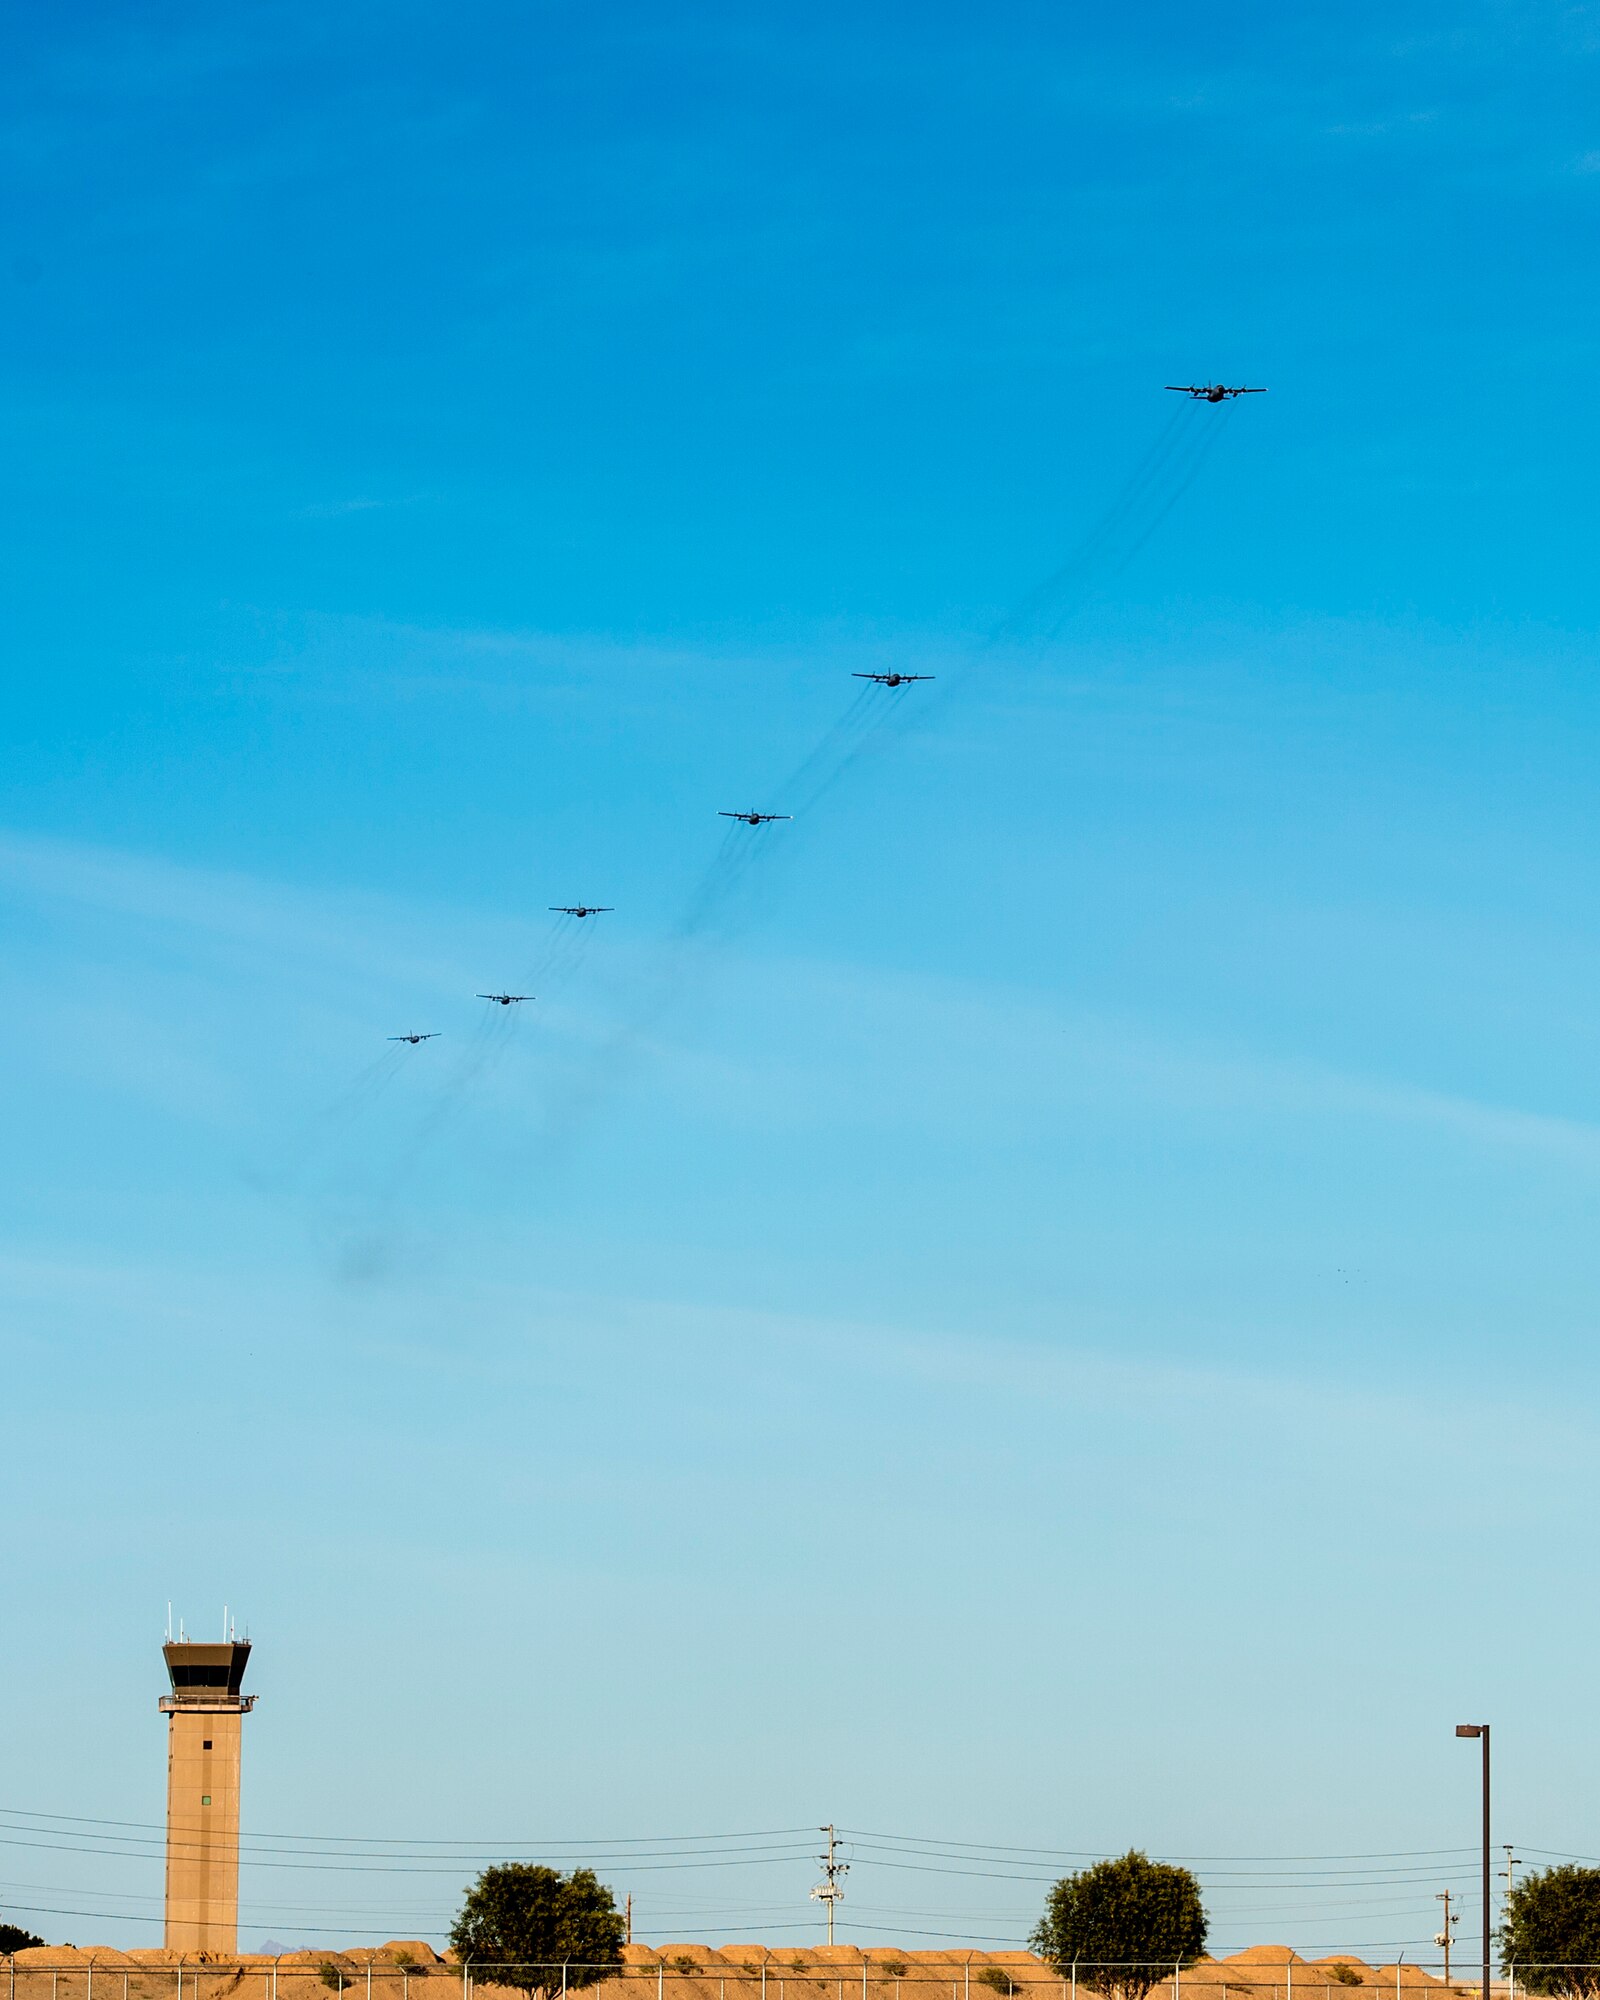 Six C-130 Hercules prepare to land after an airdrop mission in Yuma, Ariz. Feb. 28, 2019.